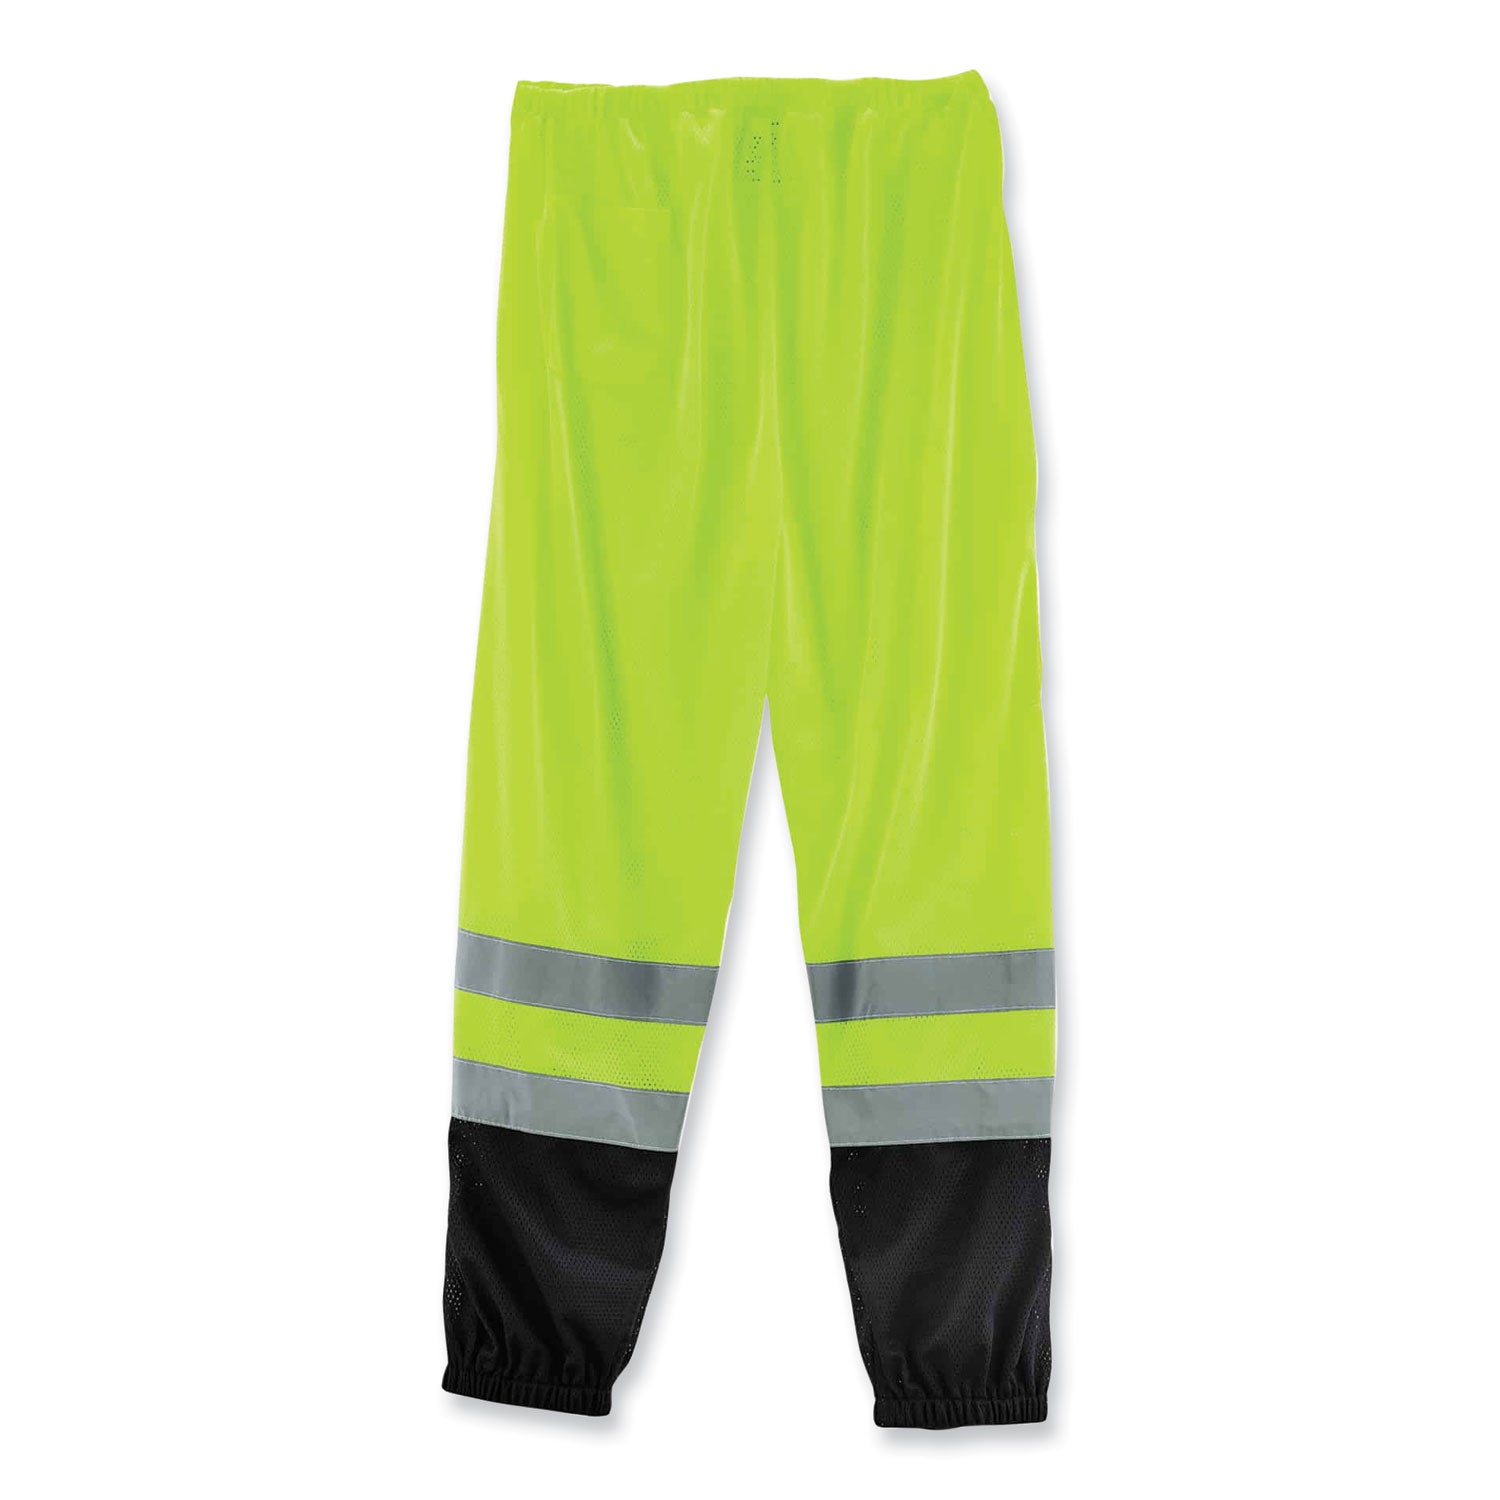 glowear-8910bk-class-e-hi-vis-pants-with-black-bottom-polyester-large-x-large-lime-ships-in-1-3-business-days_ego23955 - 2